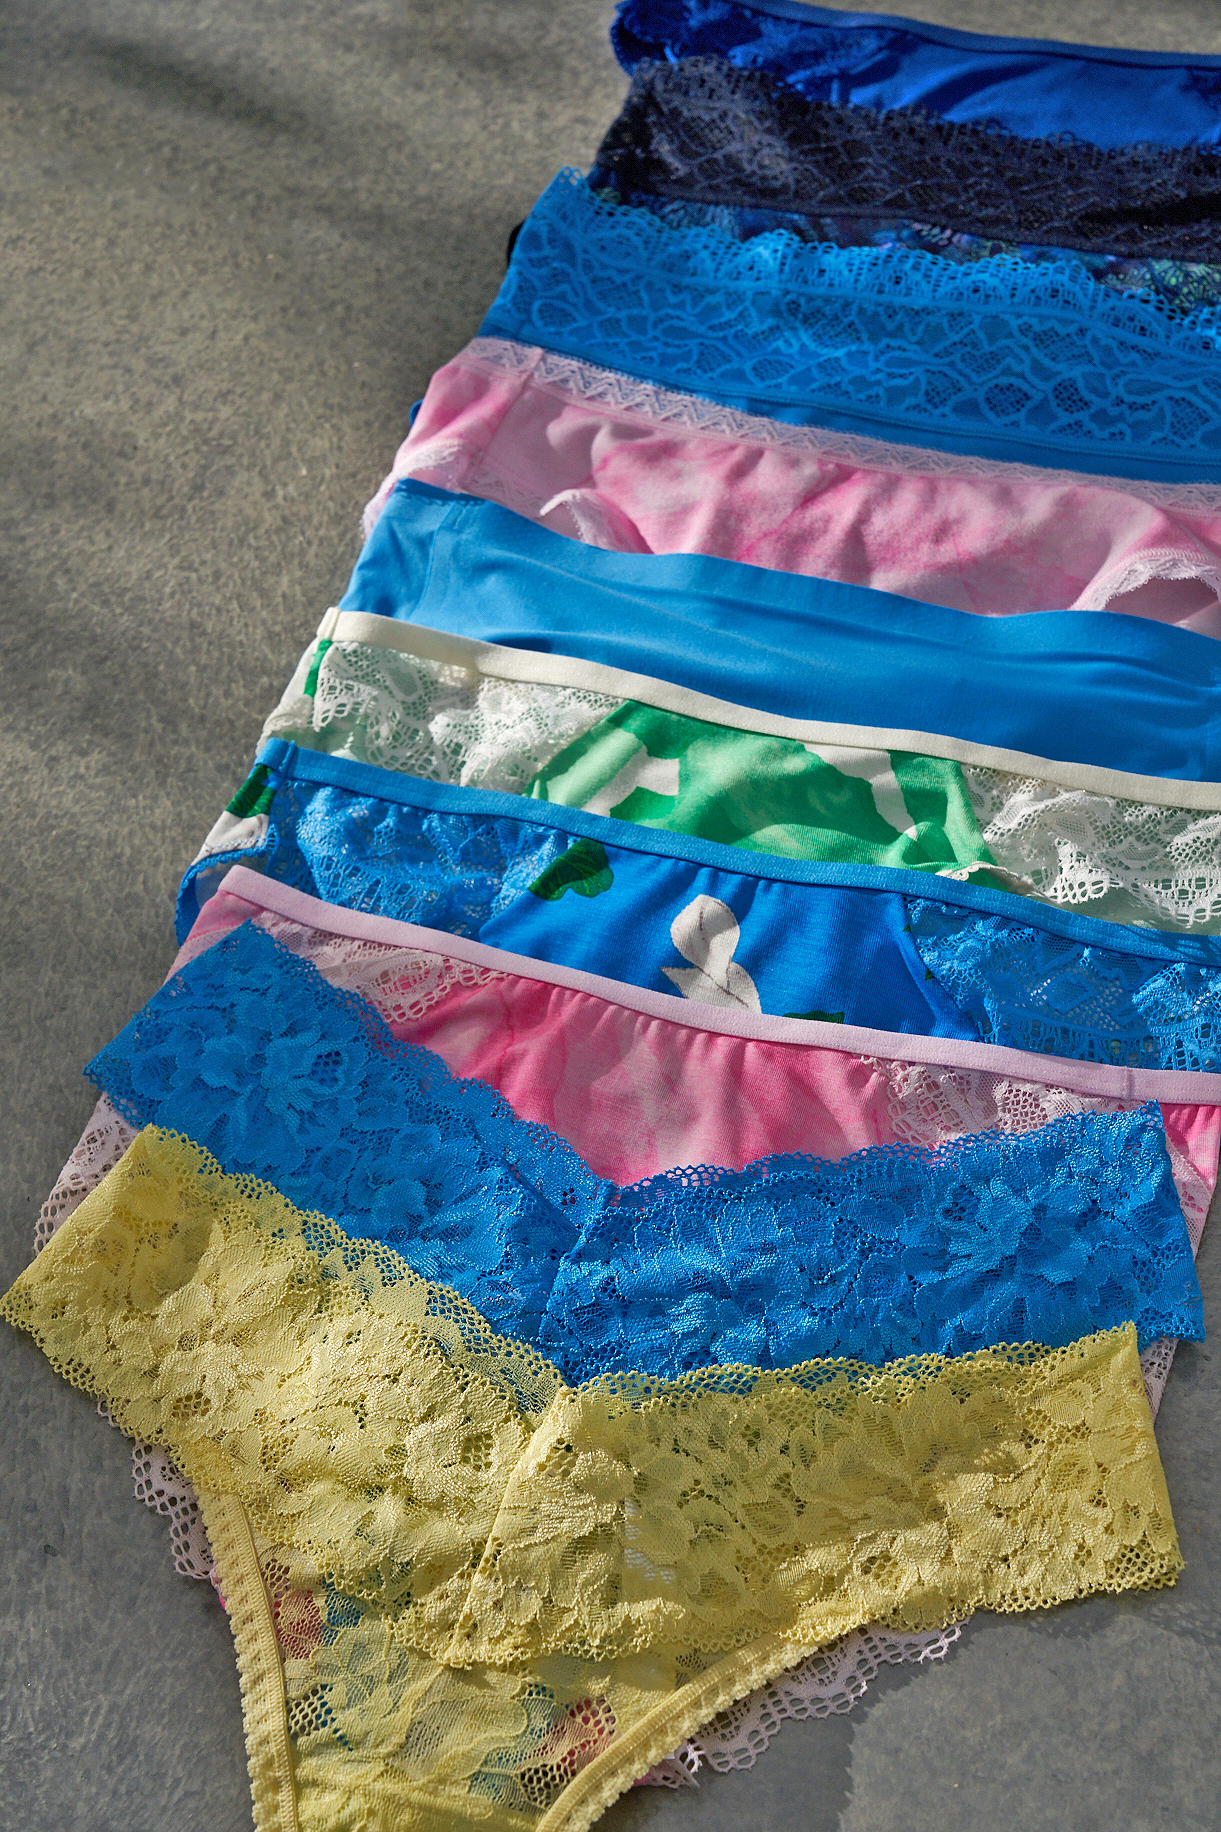 La Palmera on X: It's a panty sale at Soma Intimates now through Sunday!  Embraceable, Enbliss, Cotton Panties: $5 Each When You Buy 10 or More* 🥰  *Exclusions apply. Please see store